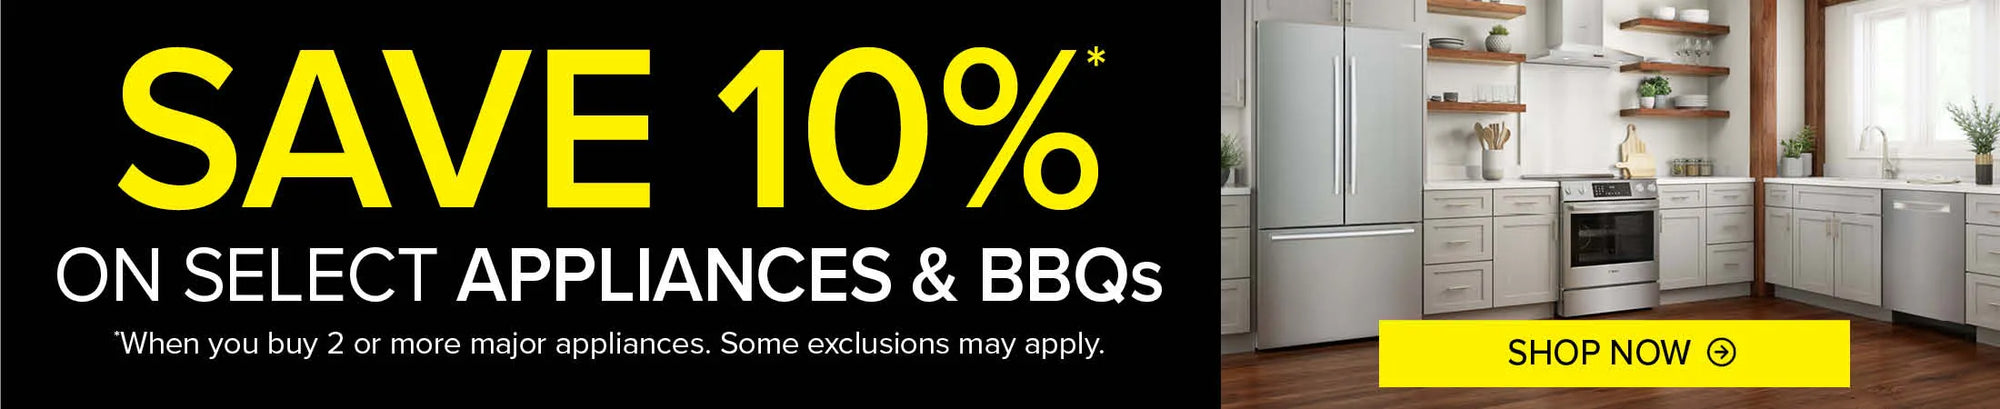 Save 10% on select appliances and BBQs when you buy 2 or more. Some exclusions apply.